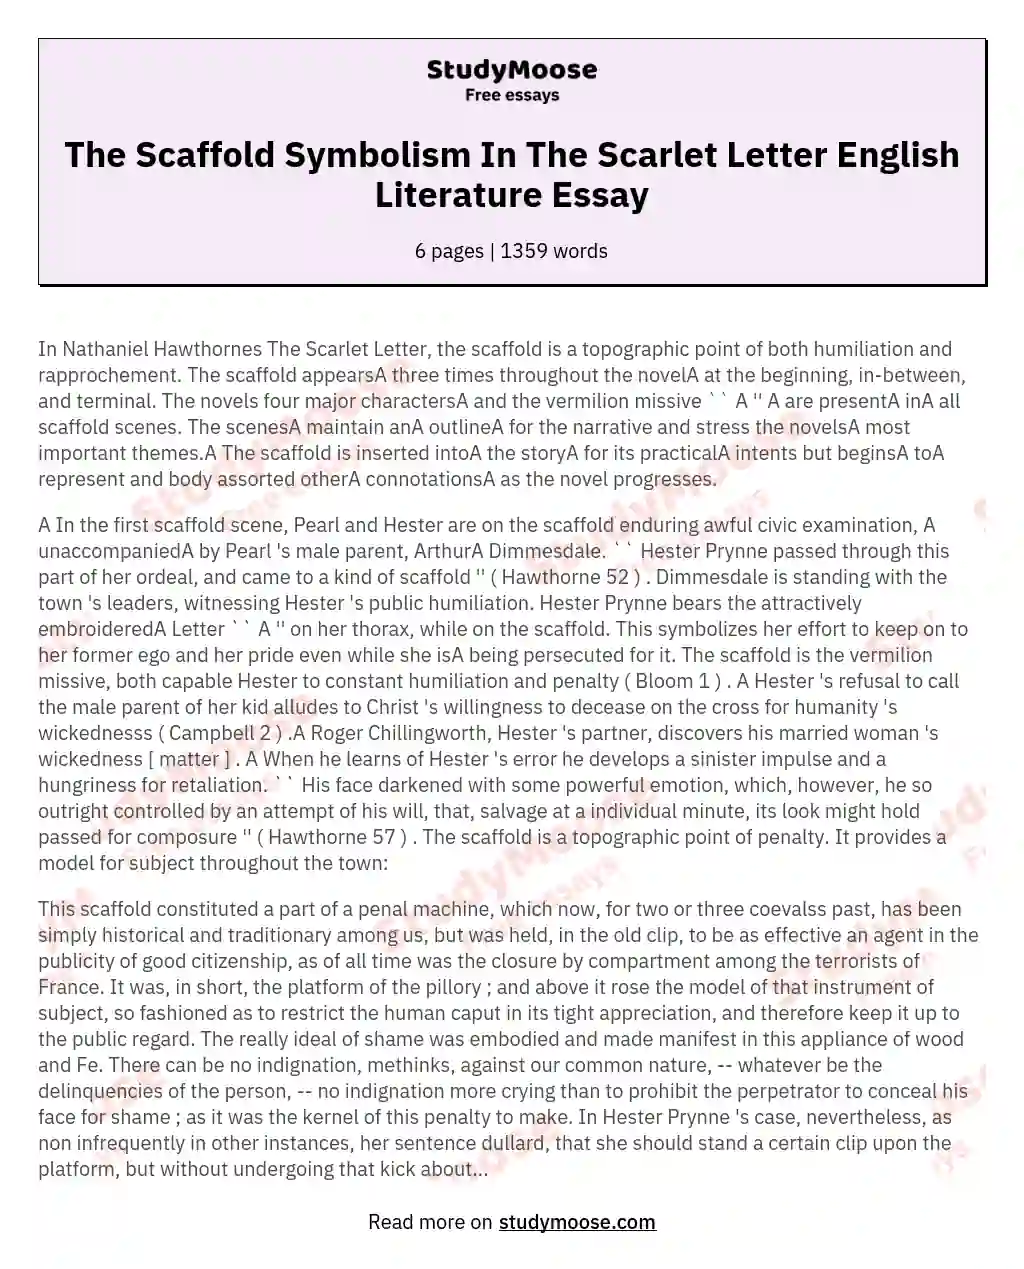 The Scaffold Symbolism In The Scarlet Letter English Literature Essay essay